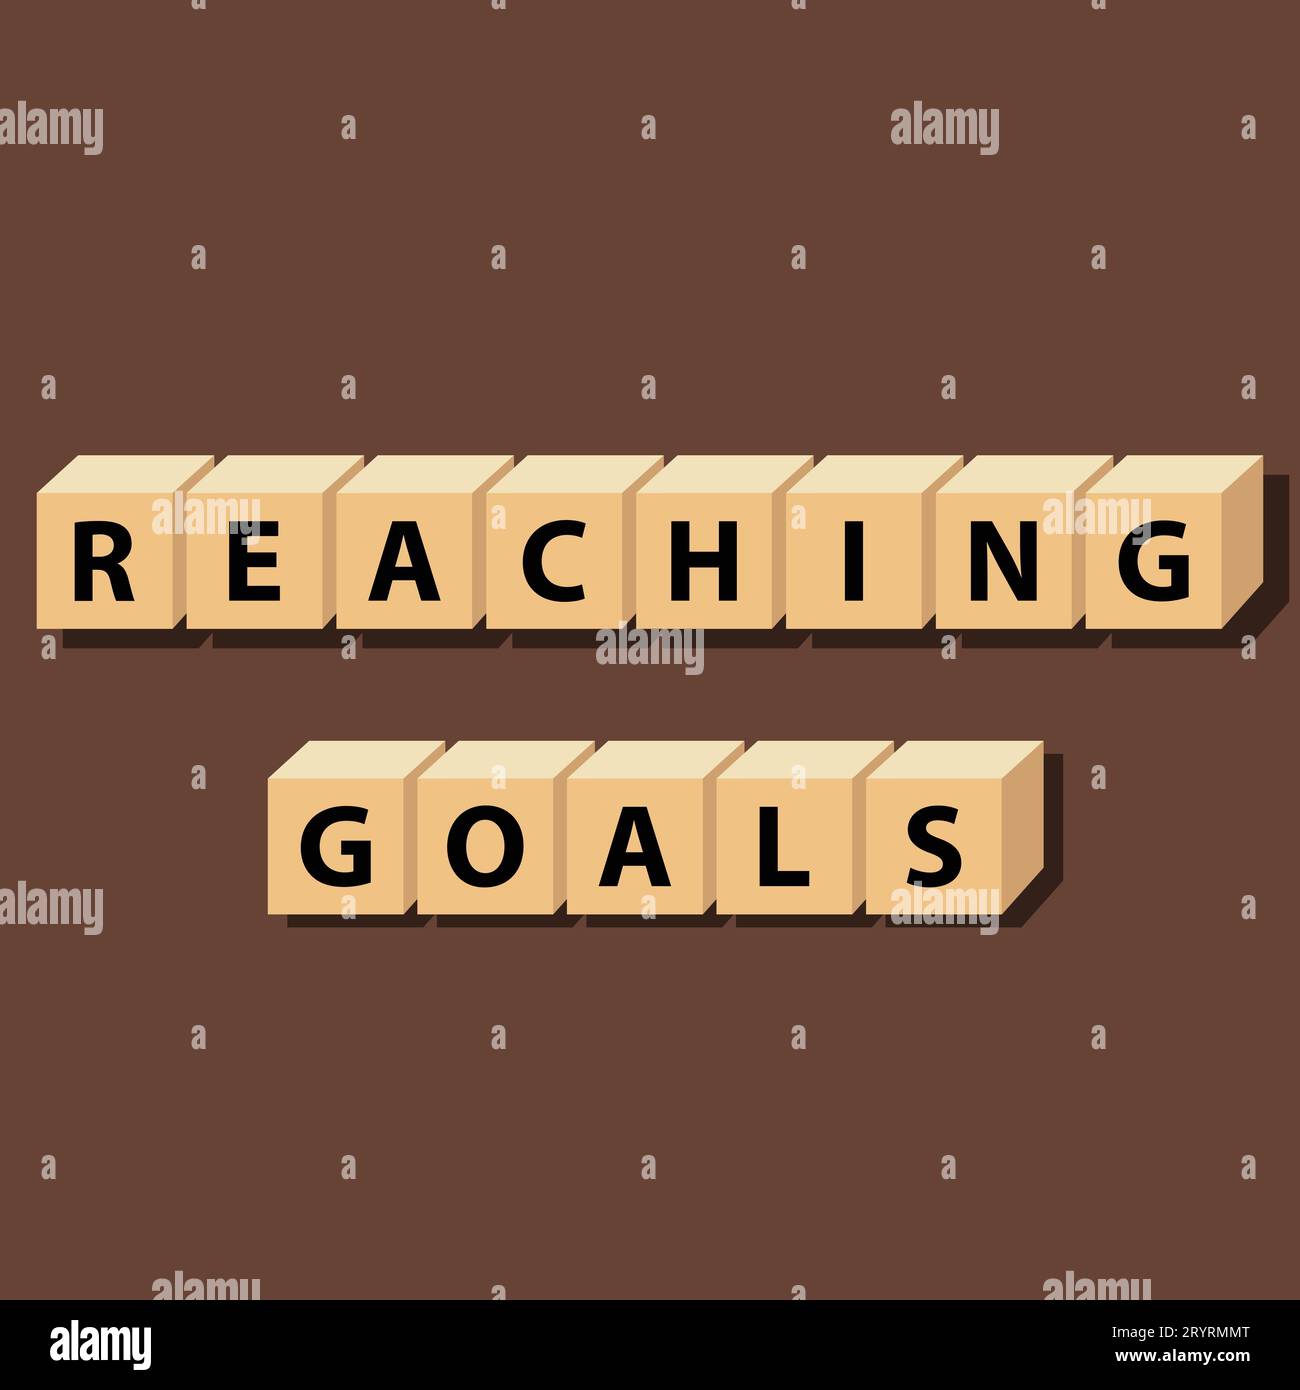 Reaching goals: cube words, positivity, vector illustration design for graphics and prints. Positive affirmations for every day. A motivational Stock Vector